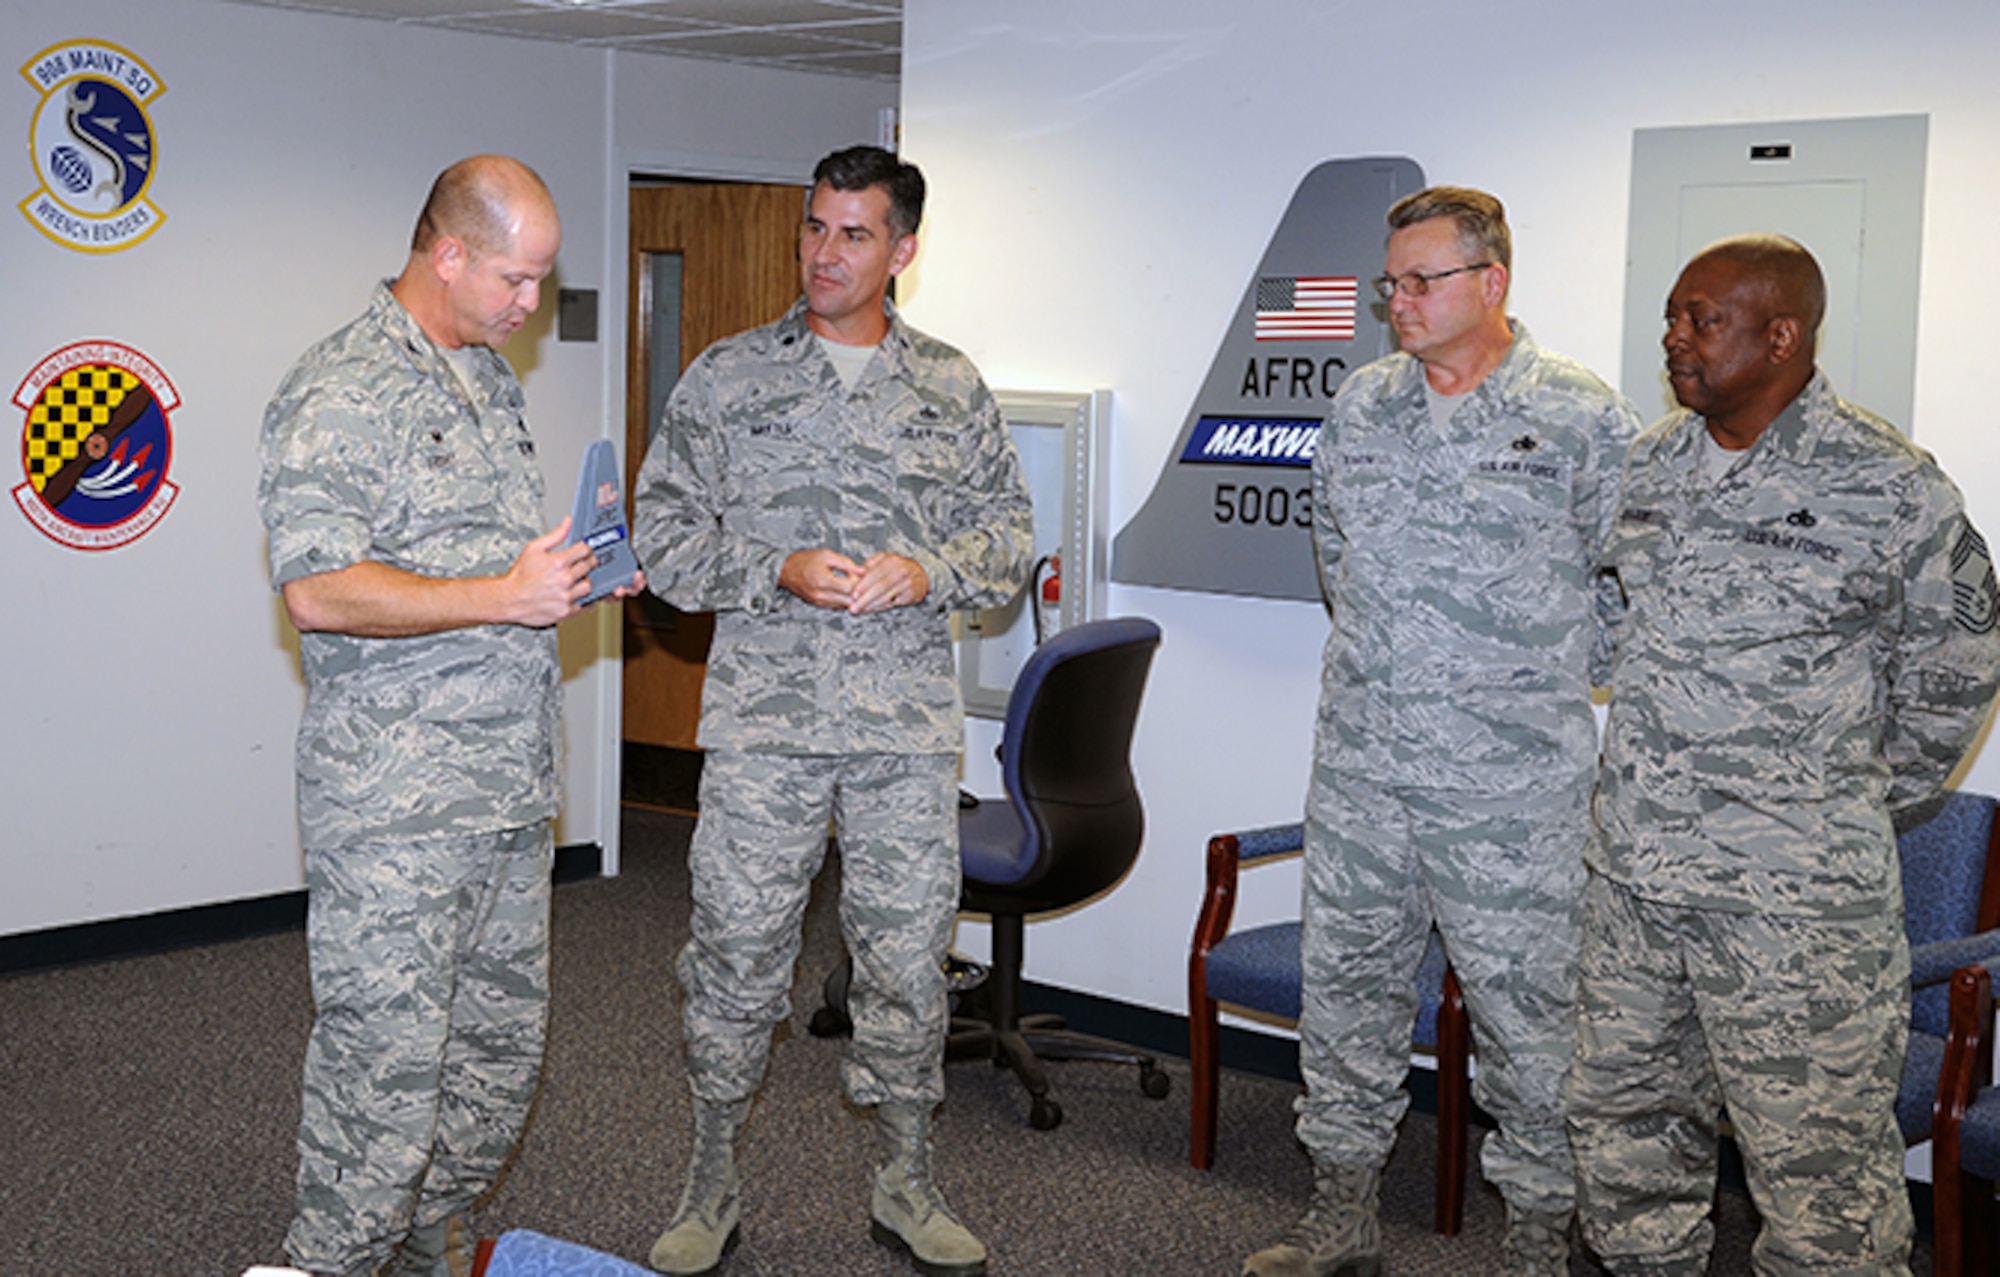 Lt. Col. James L. Hartle, deputy commander of the 908th Maintenance Group, second from left, receives a tail flash from Group Commander Col. Joe Friday while Chief Master Sgts. Douglas Dearth and Brent Hardie.